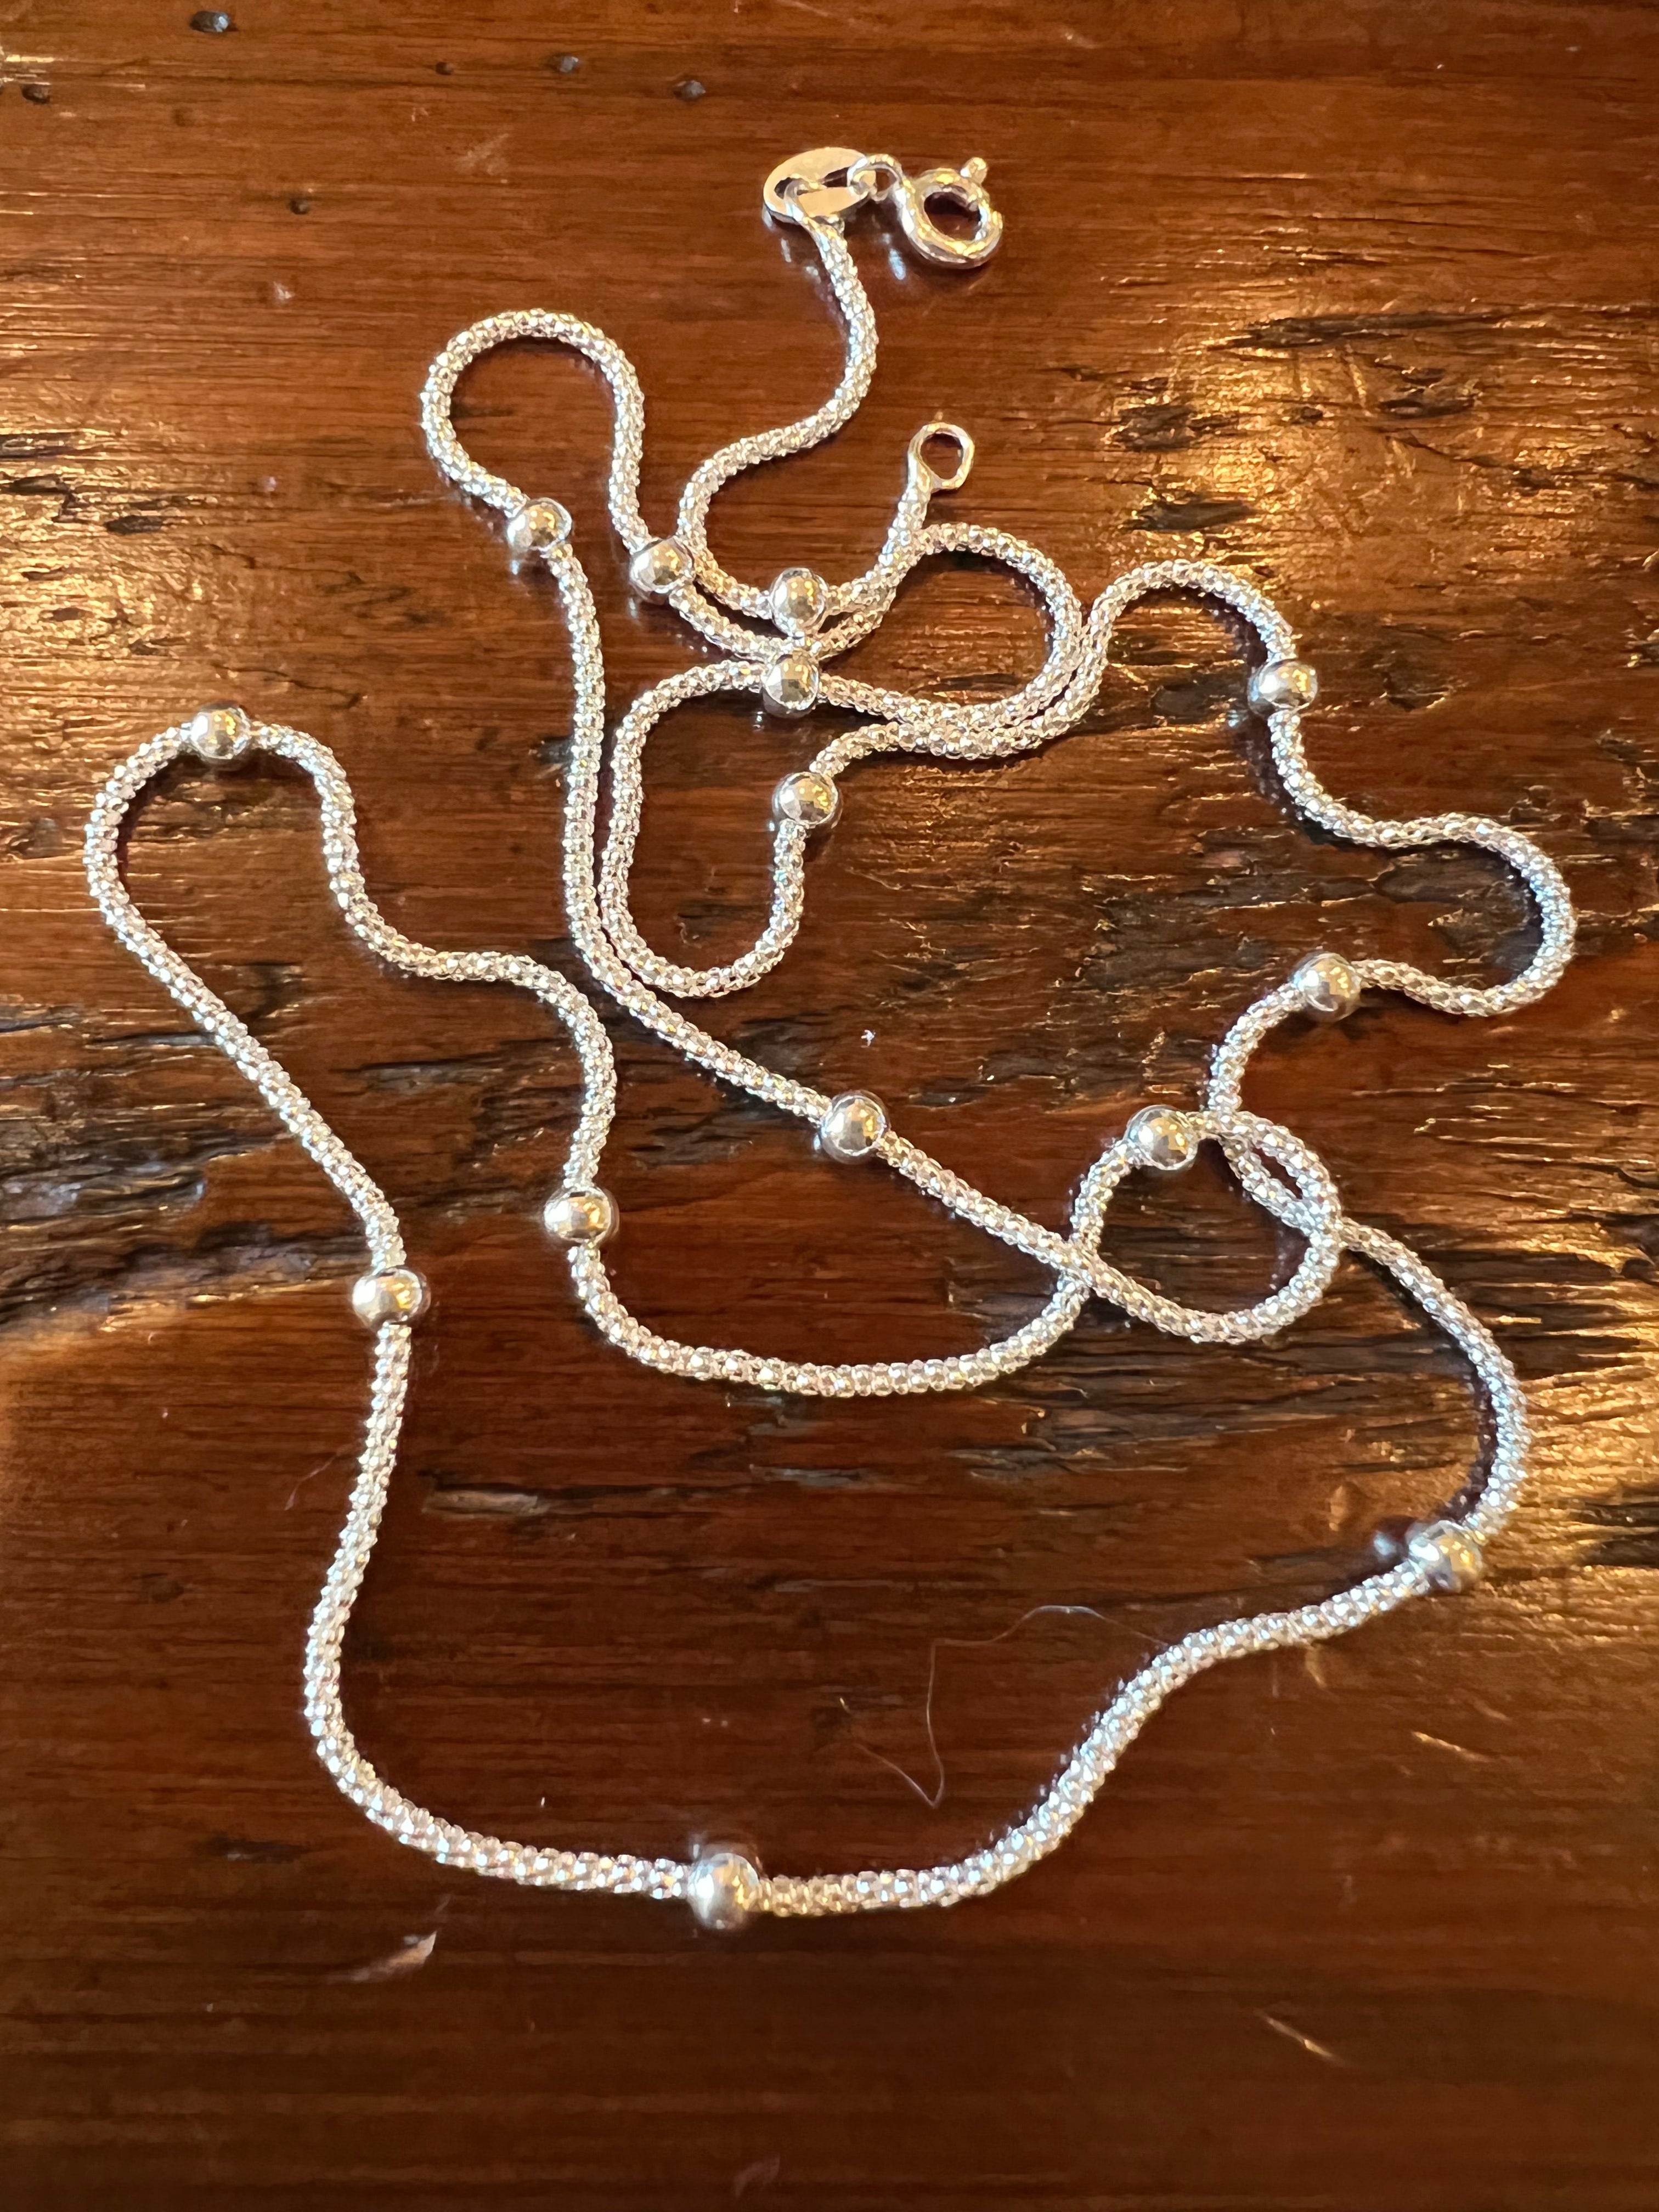 20" Sterling Silver Chain w/ Silver Beads